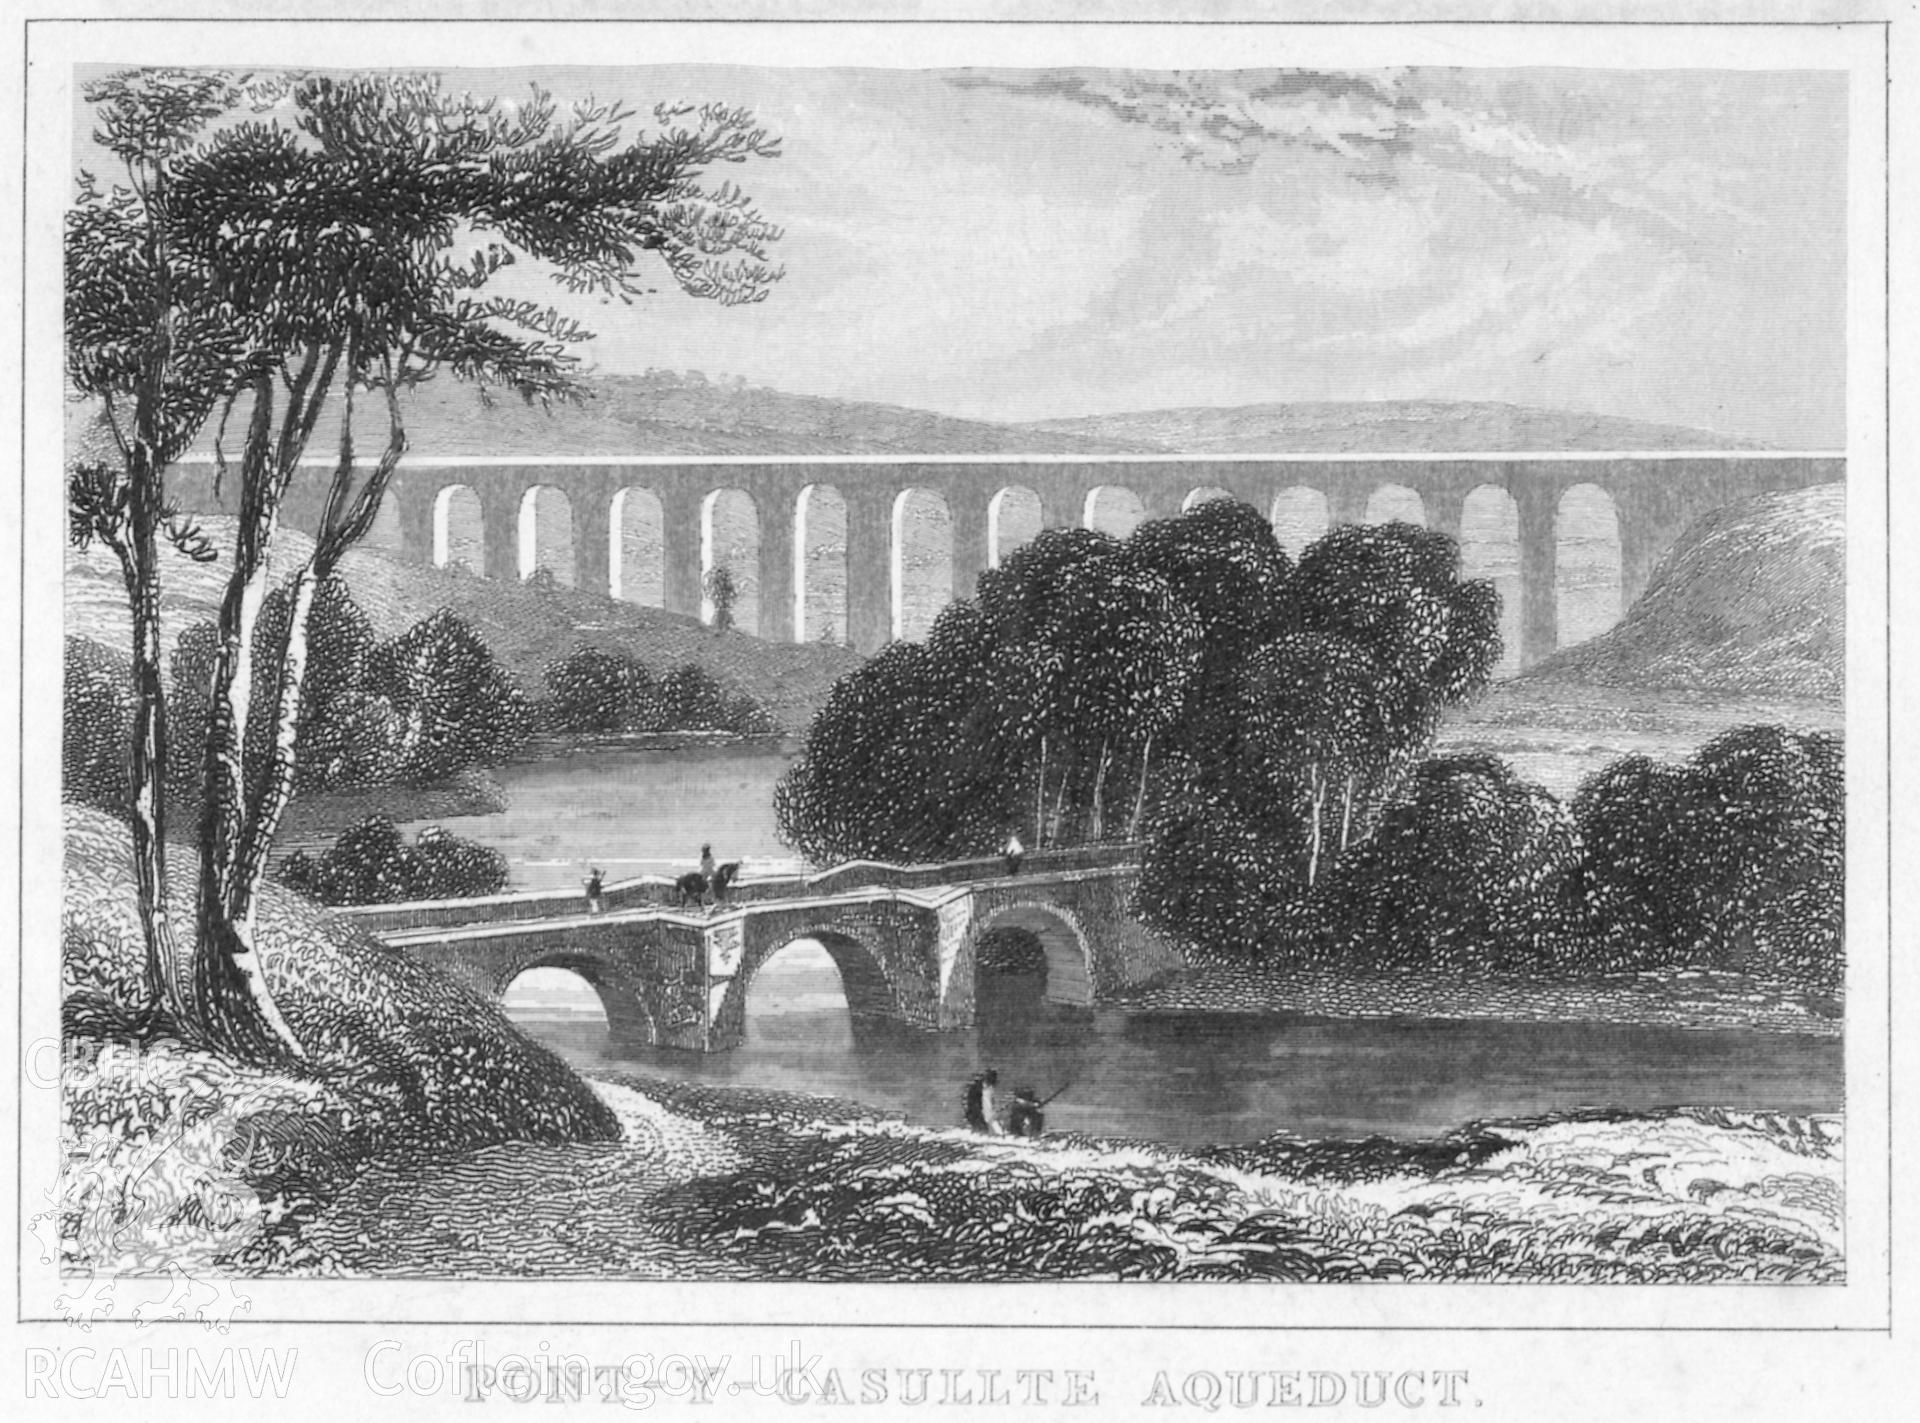 Undated etching of Pontcysyllte Aqueduct.  Originally produced for Thomas Dugdale's part-work survey published as "The Curiosities of Great Britain" or "England Delineated" in various formats between 1838 and 1860.